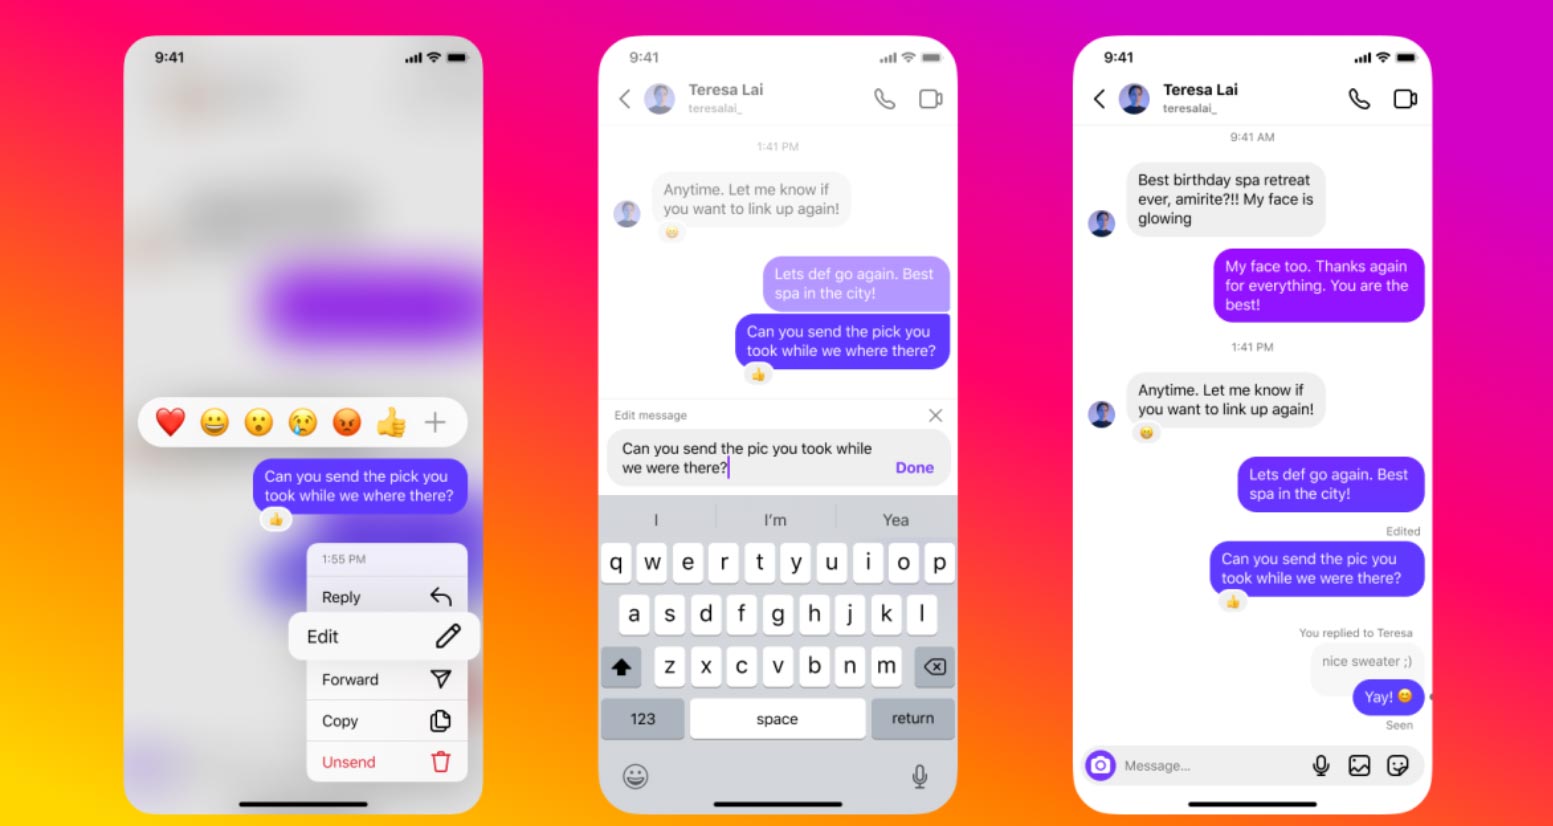 Instagram now lets users edit DMs up to 15 minutes after sending them, pin three messaging threads